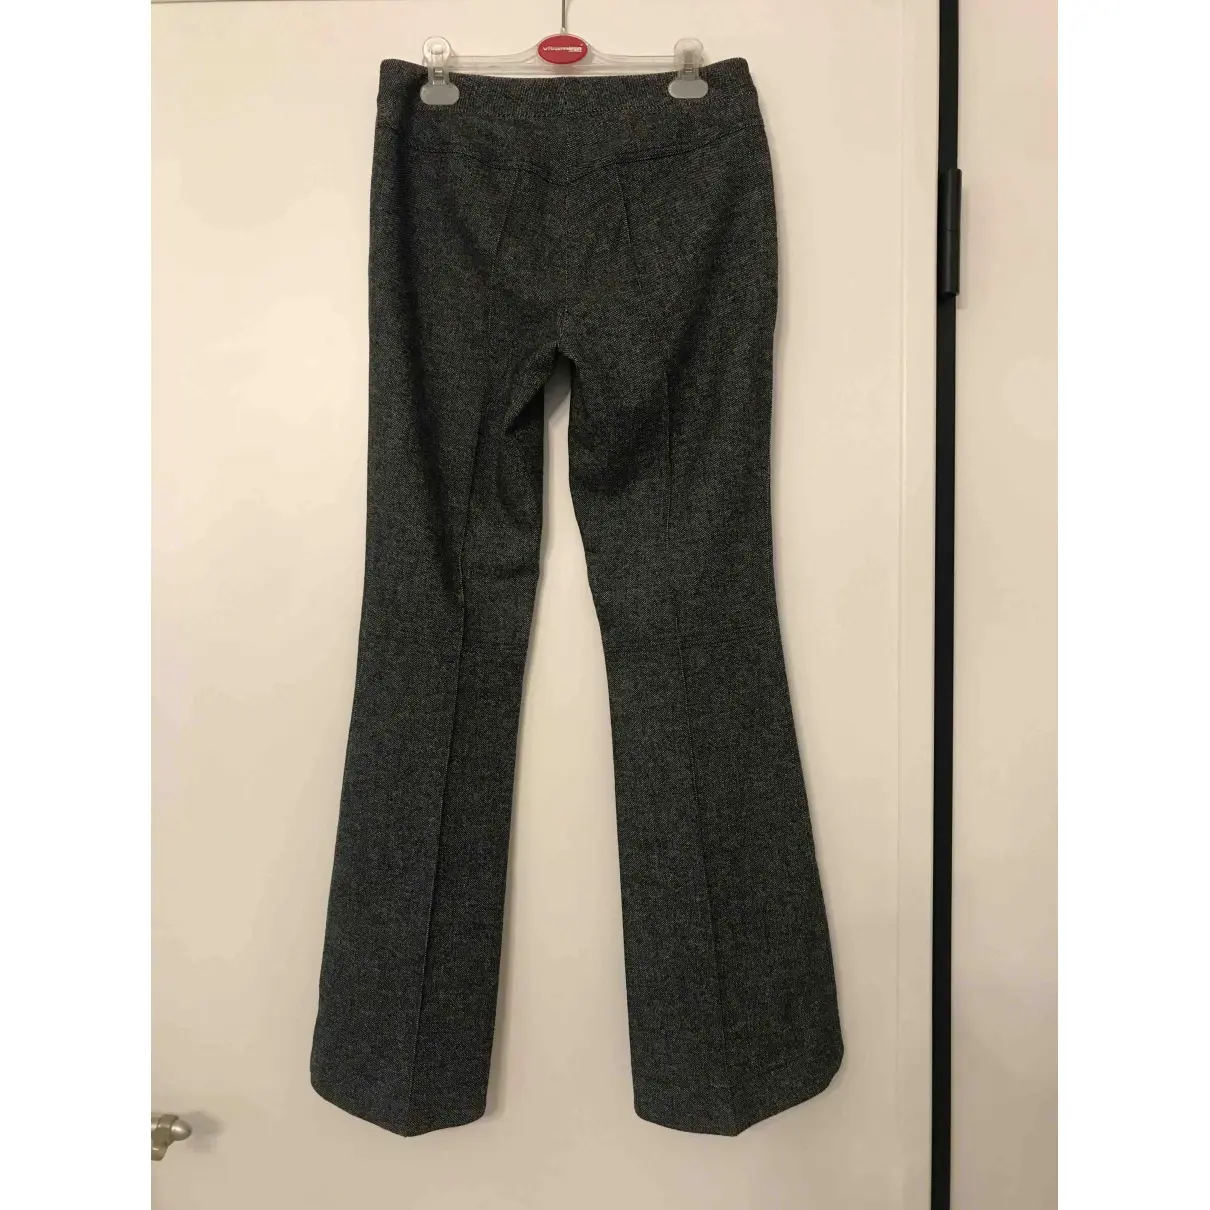 John Galliano Wool trousers for sale - Vintage